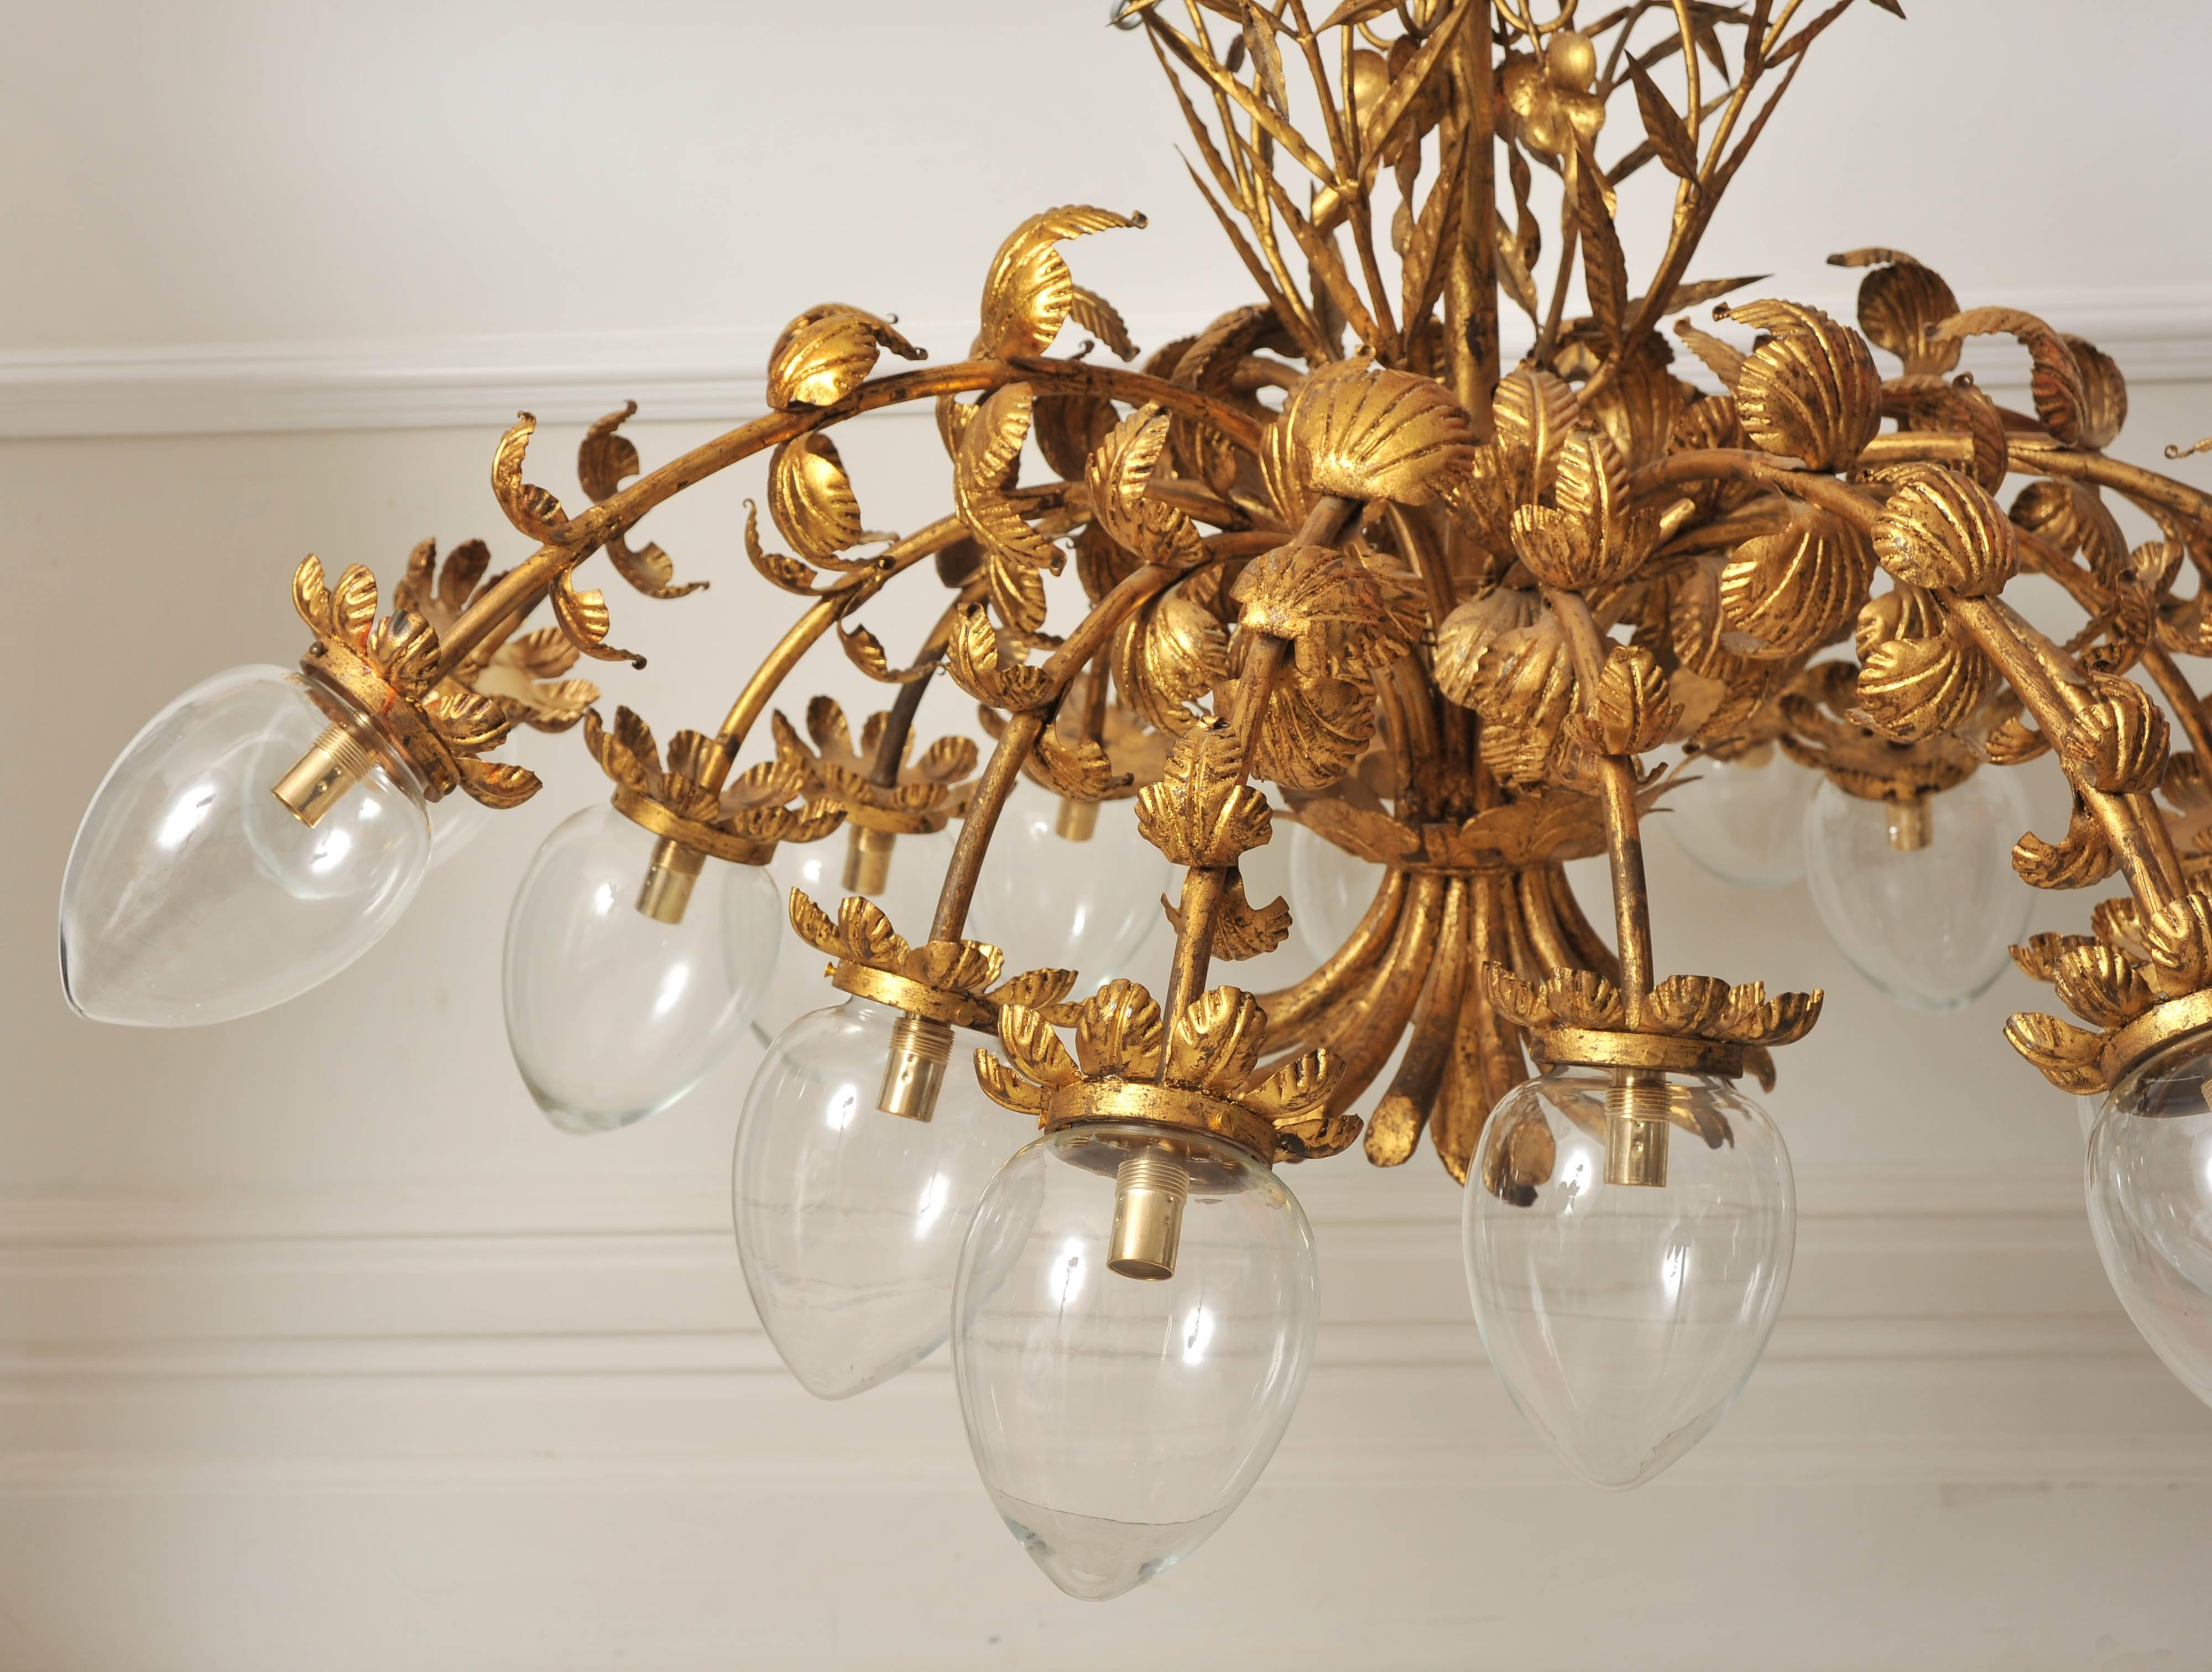 We have never seen another chandelier like this stunning example. It is incredibly decorative and striking. The chandelier is gold metal and is decorated with unusual leaves along each of it's 16 arms with stems at the base and grapes and vines at